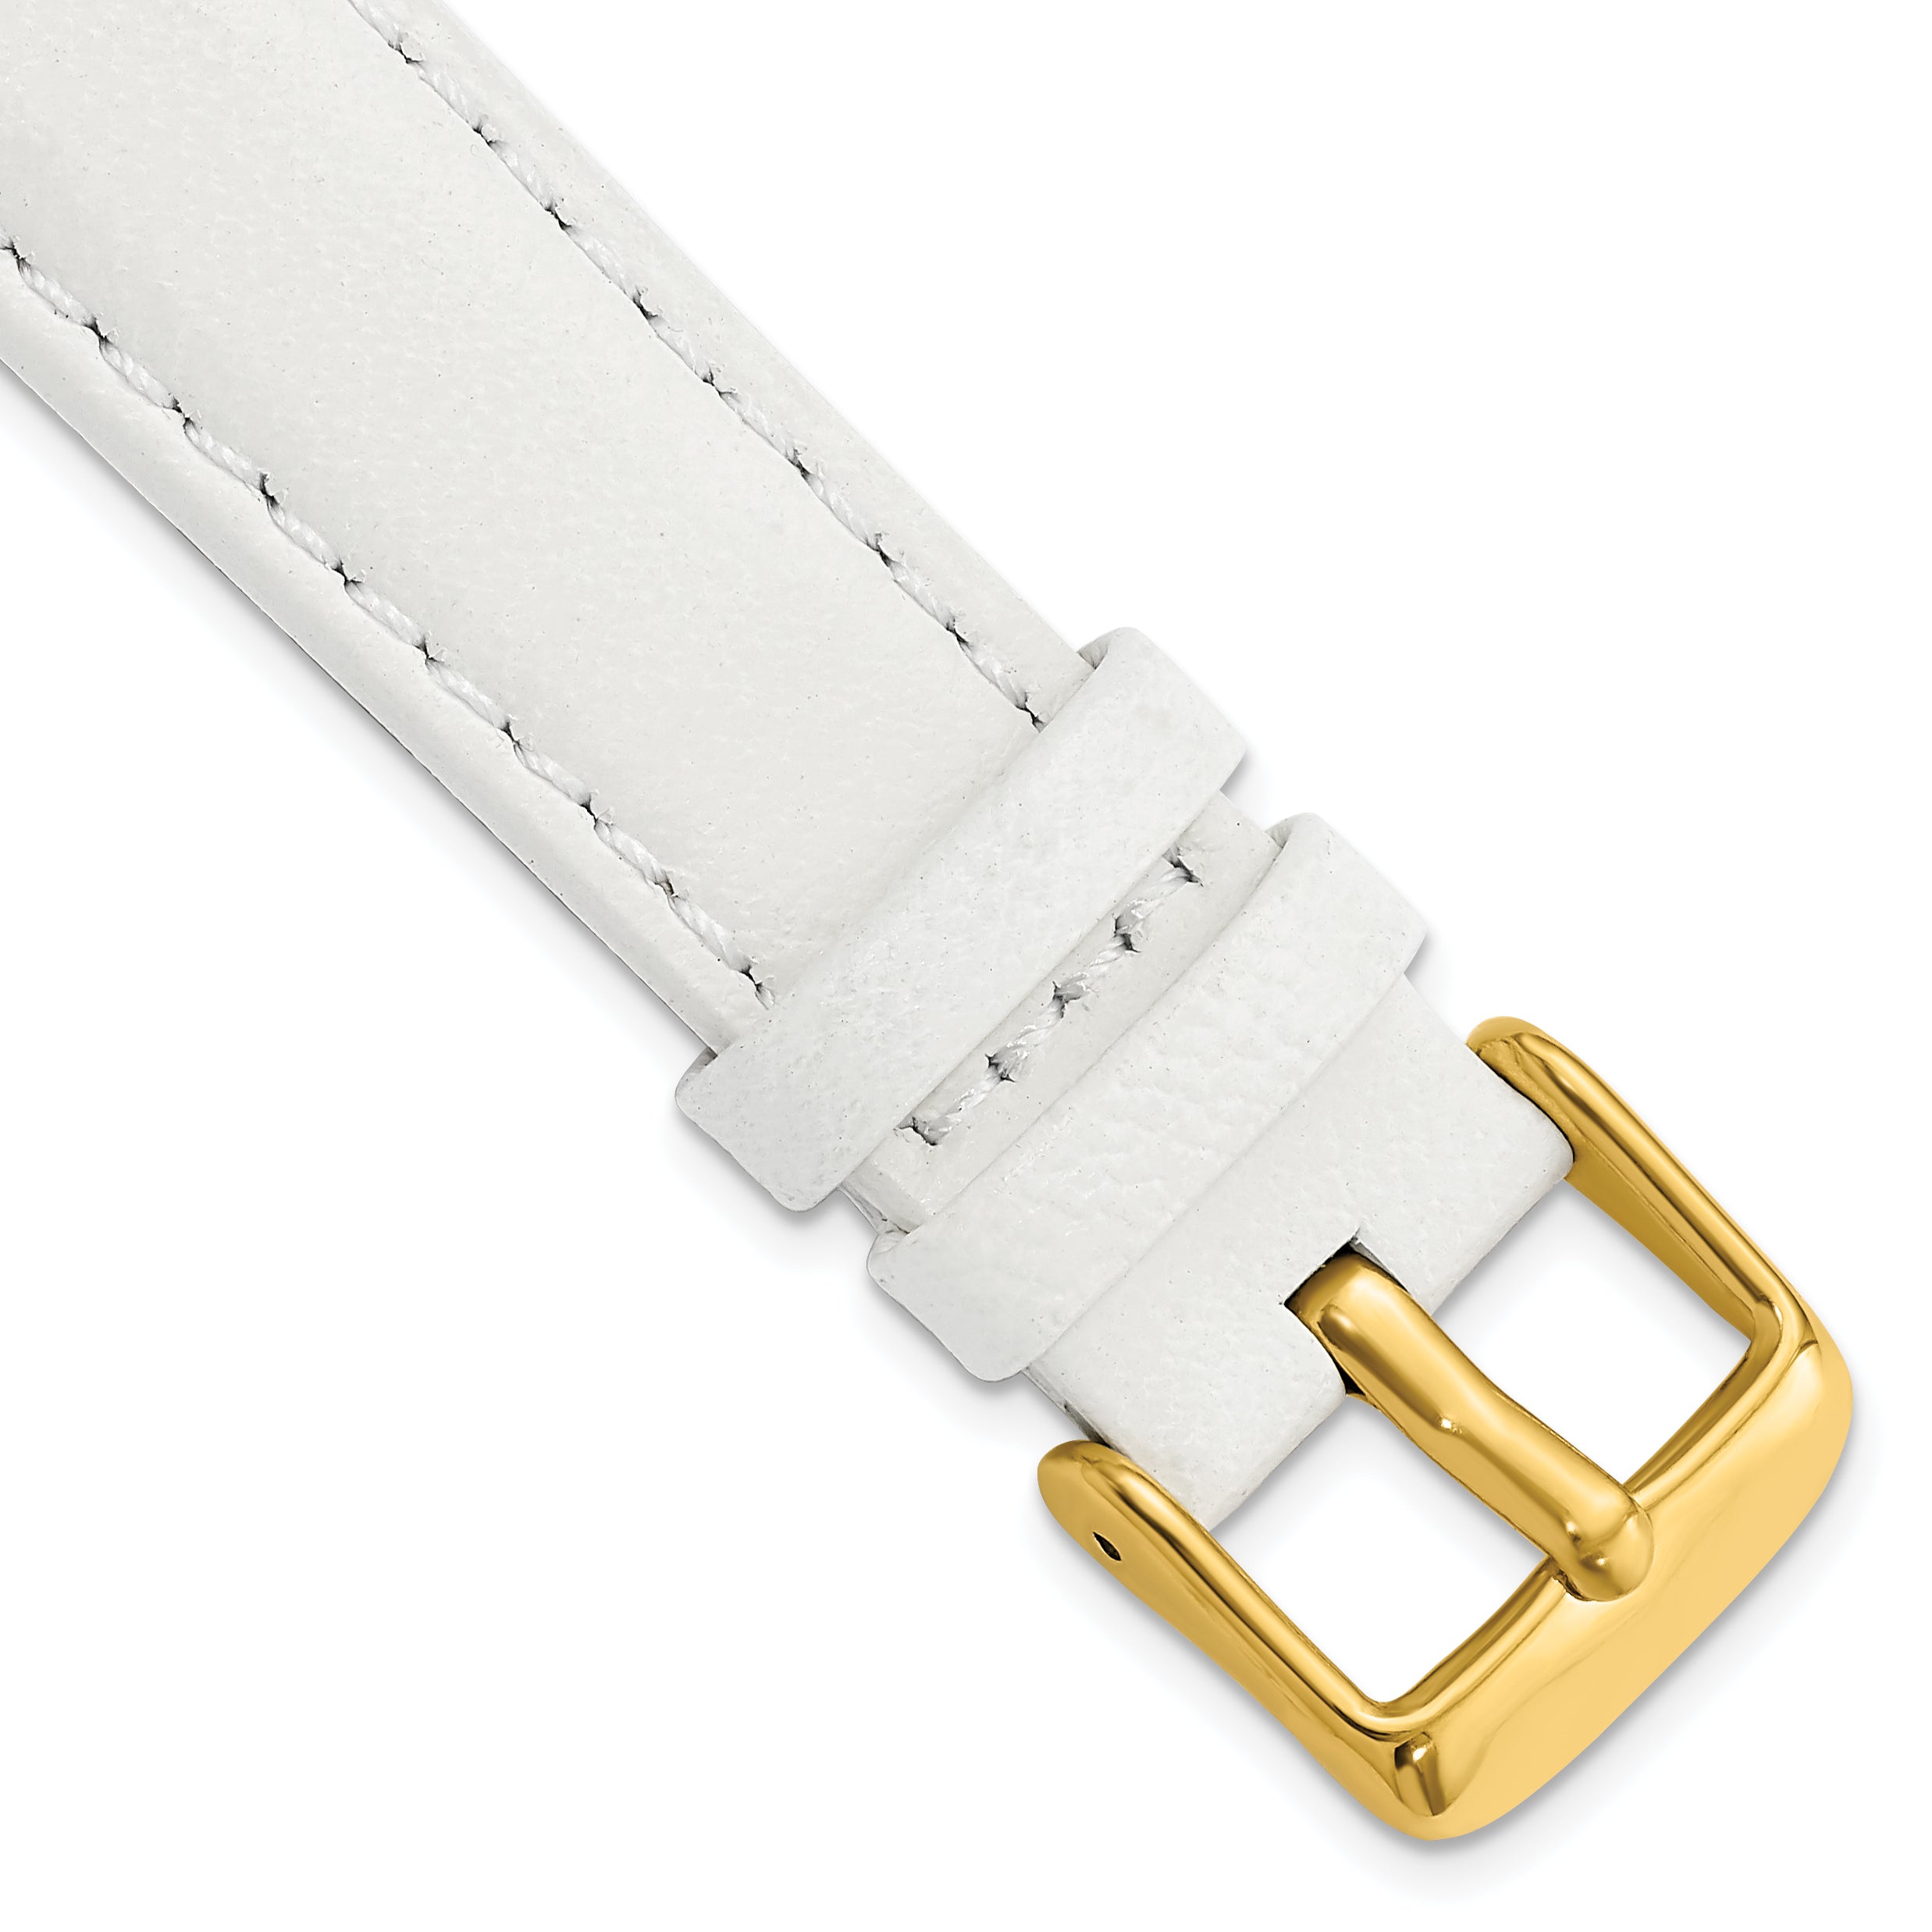 DeBeer 18mm White Glove Leather with Gold-tone Panerai Style Buckle 7.75 inch Watch Band